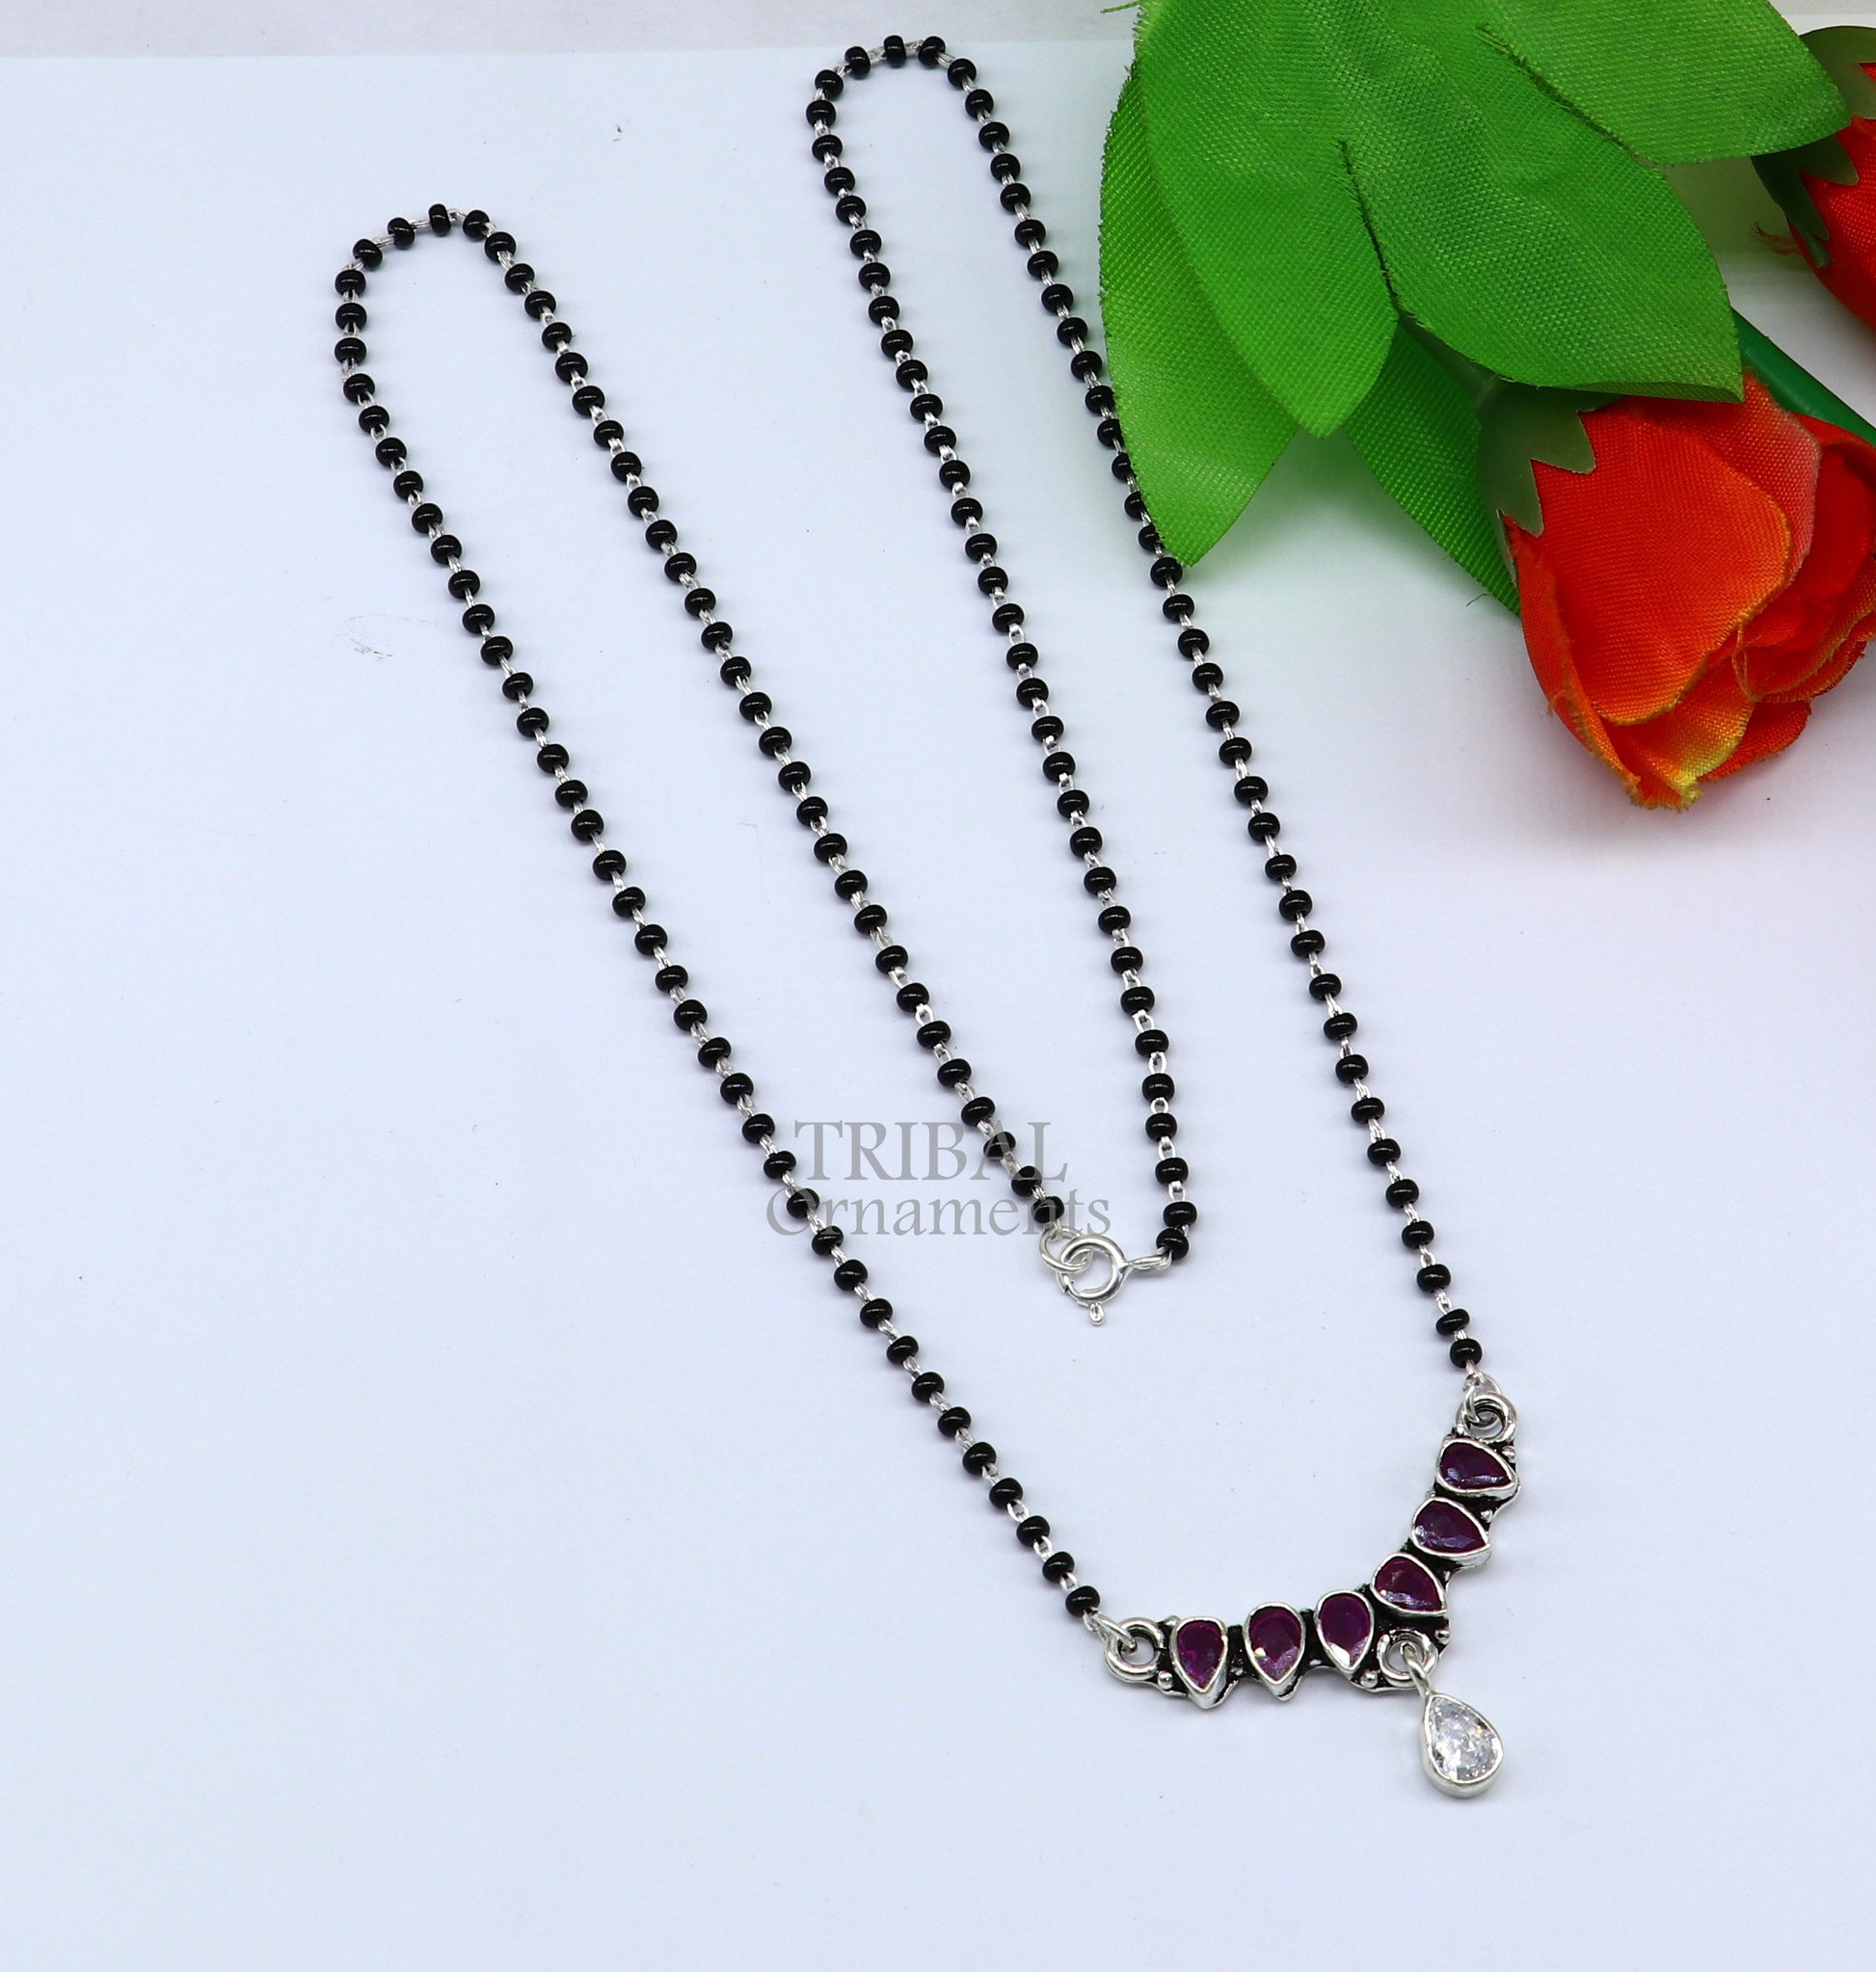 925 sterling silver black beads chain Trendy necklace, gorgeous flower design pendant, traditional style brides Mangalsutra necklace MS02 - TRIBAL ORNAMENTS